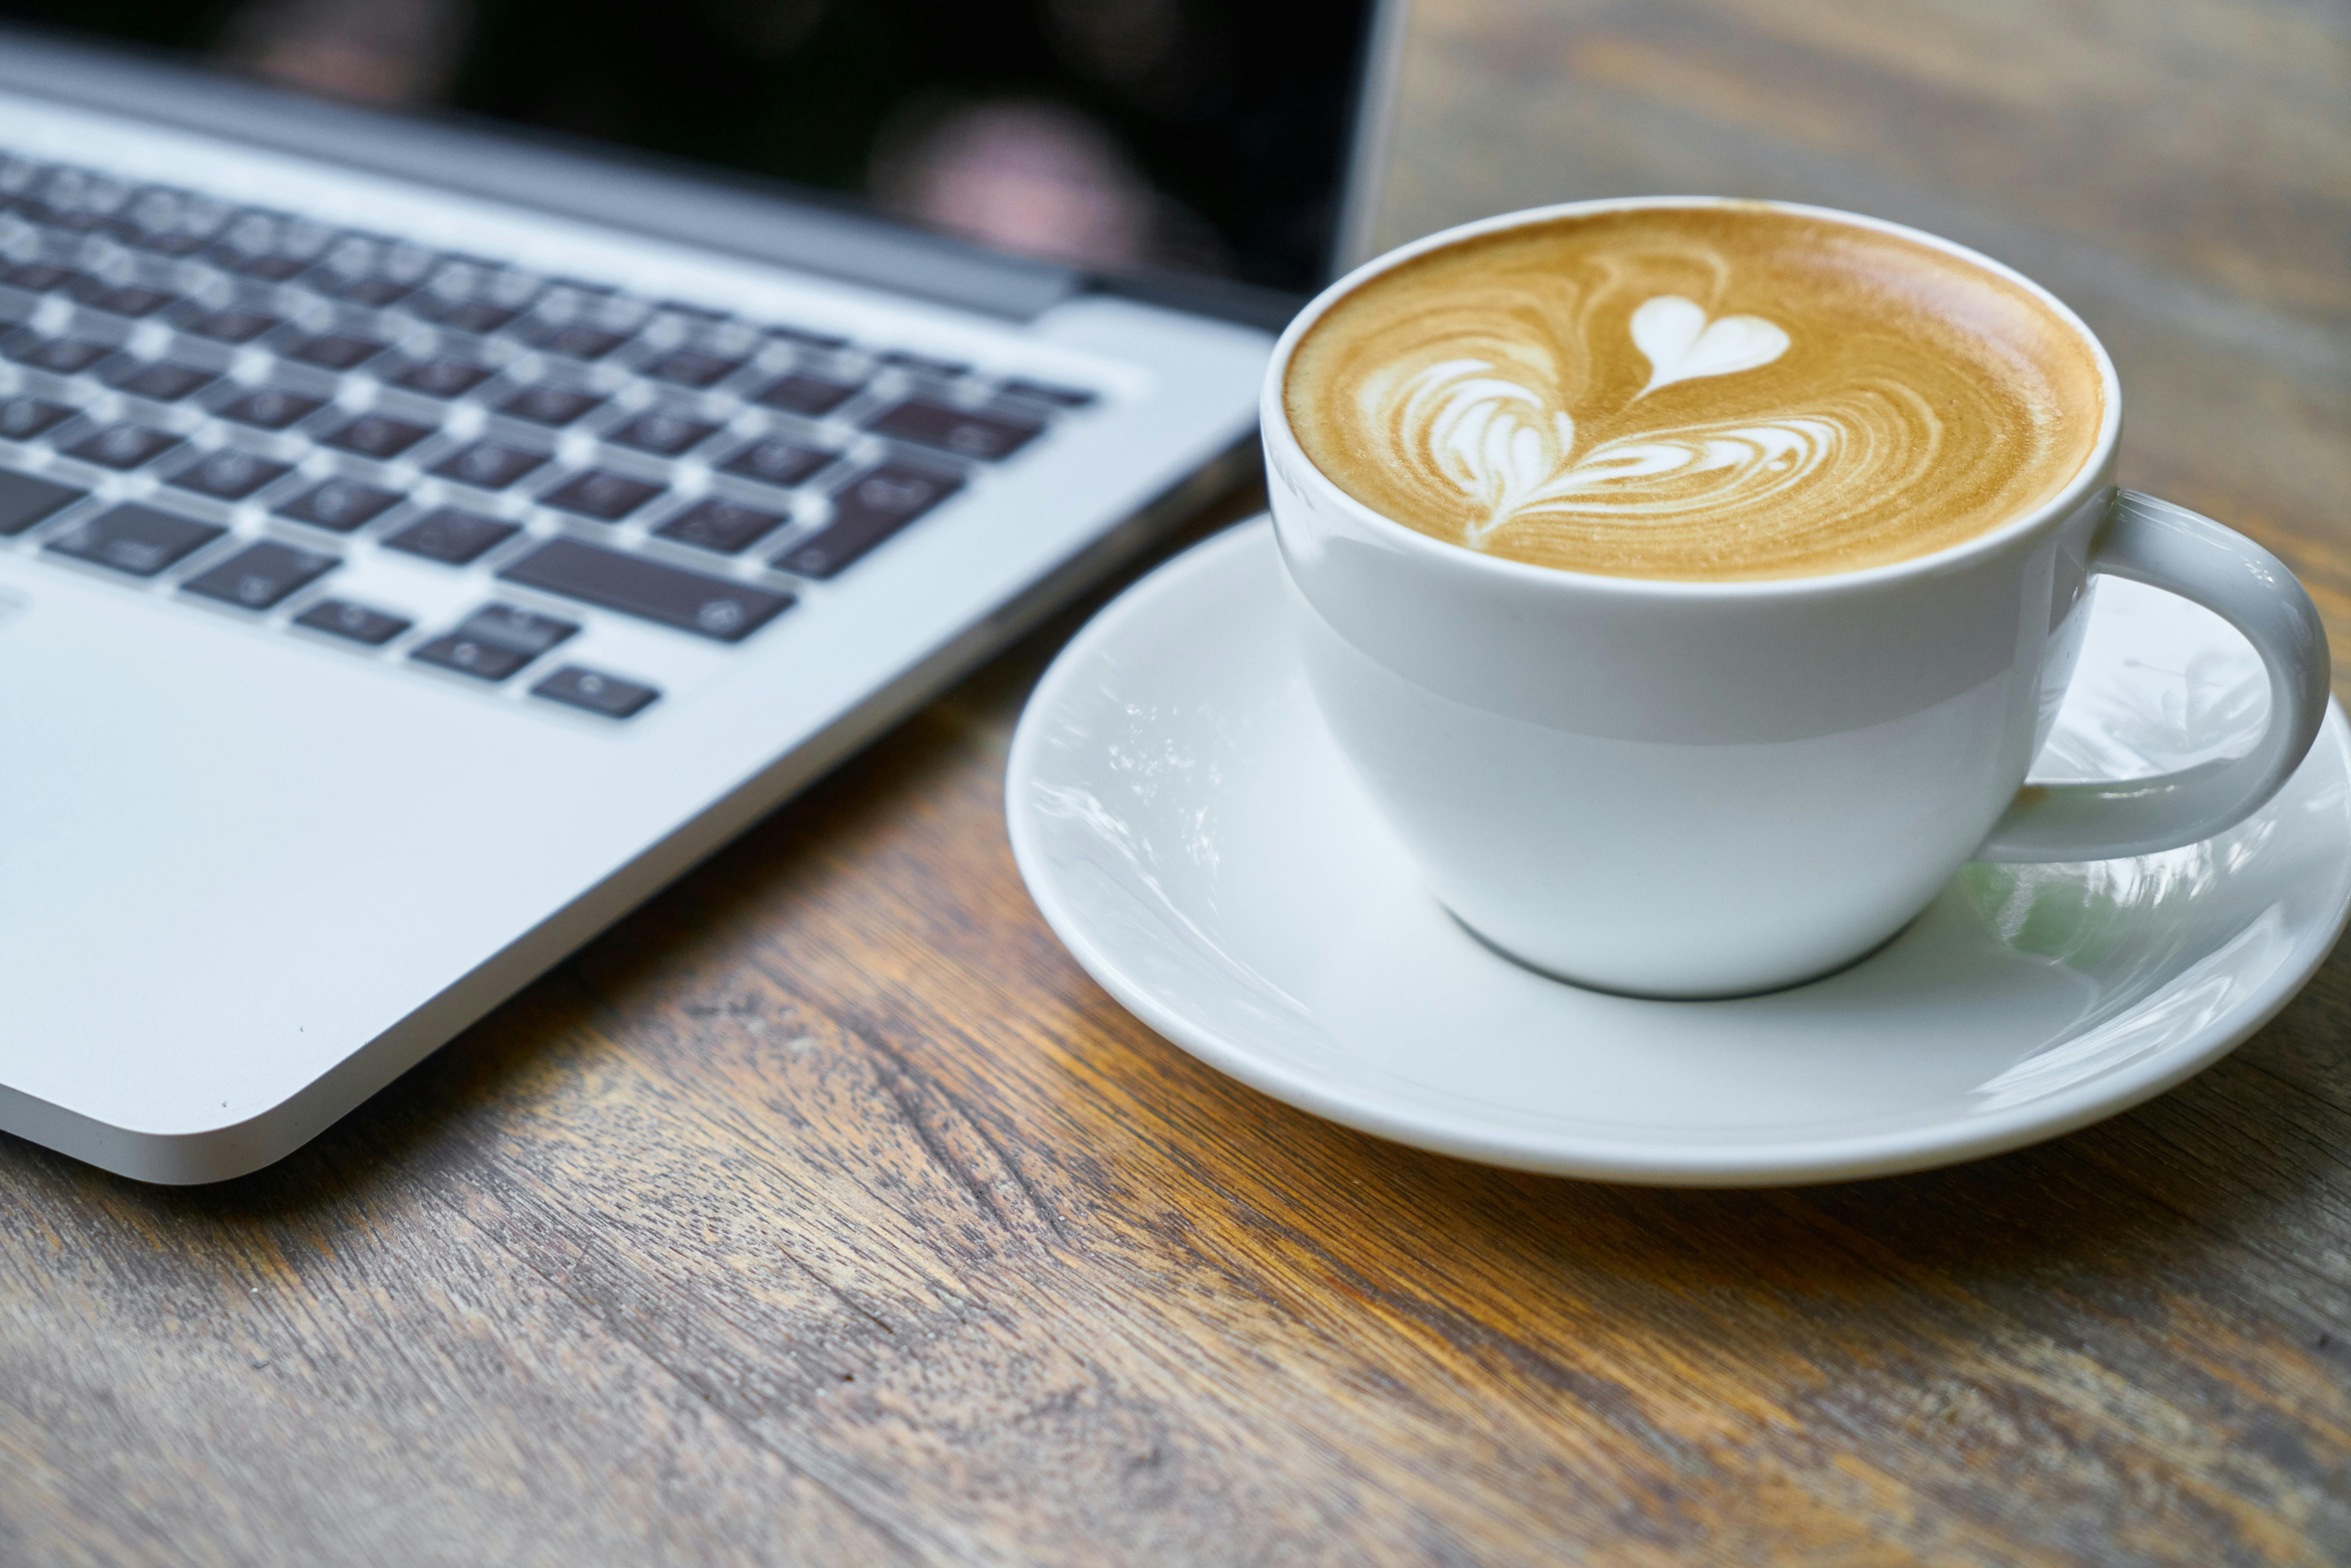 Cup of coffee next to a laptop